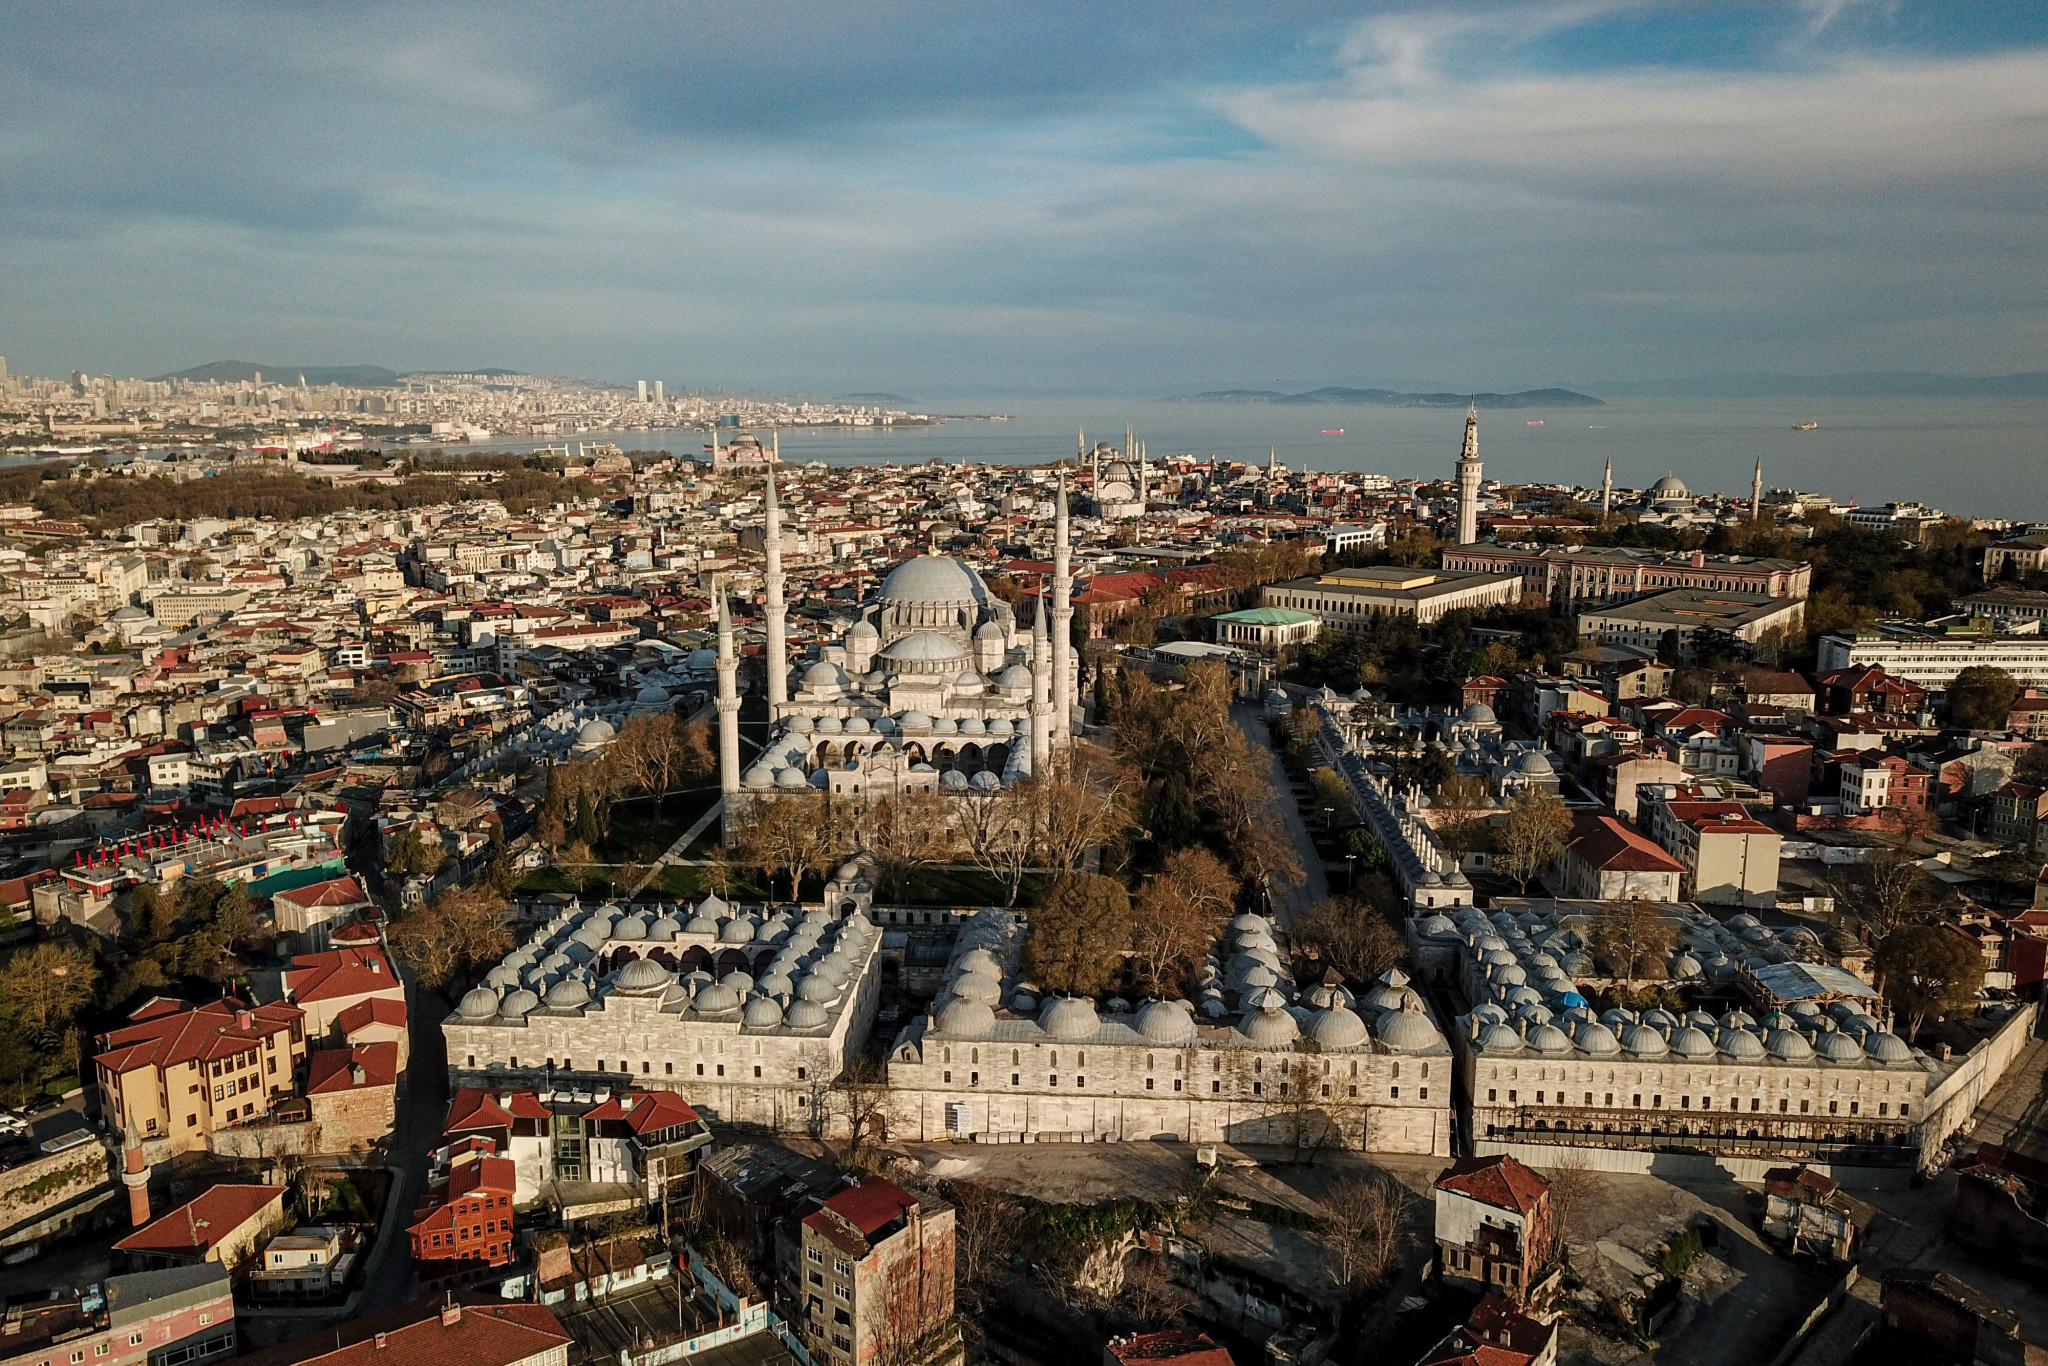 Istanbul named replacement host city for FIG Congress moved to accommodate Russian officials 